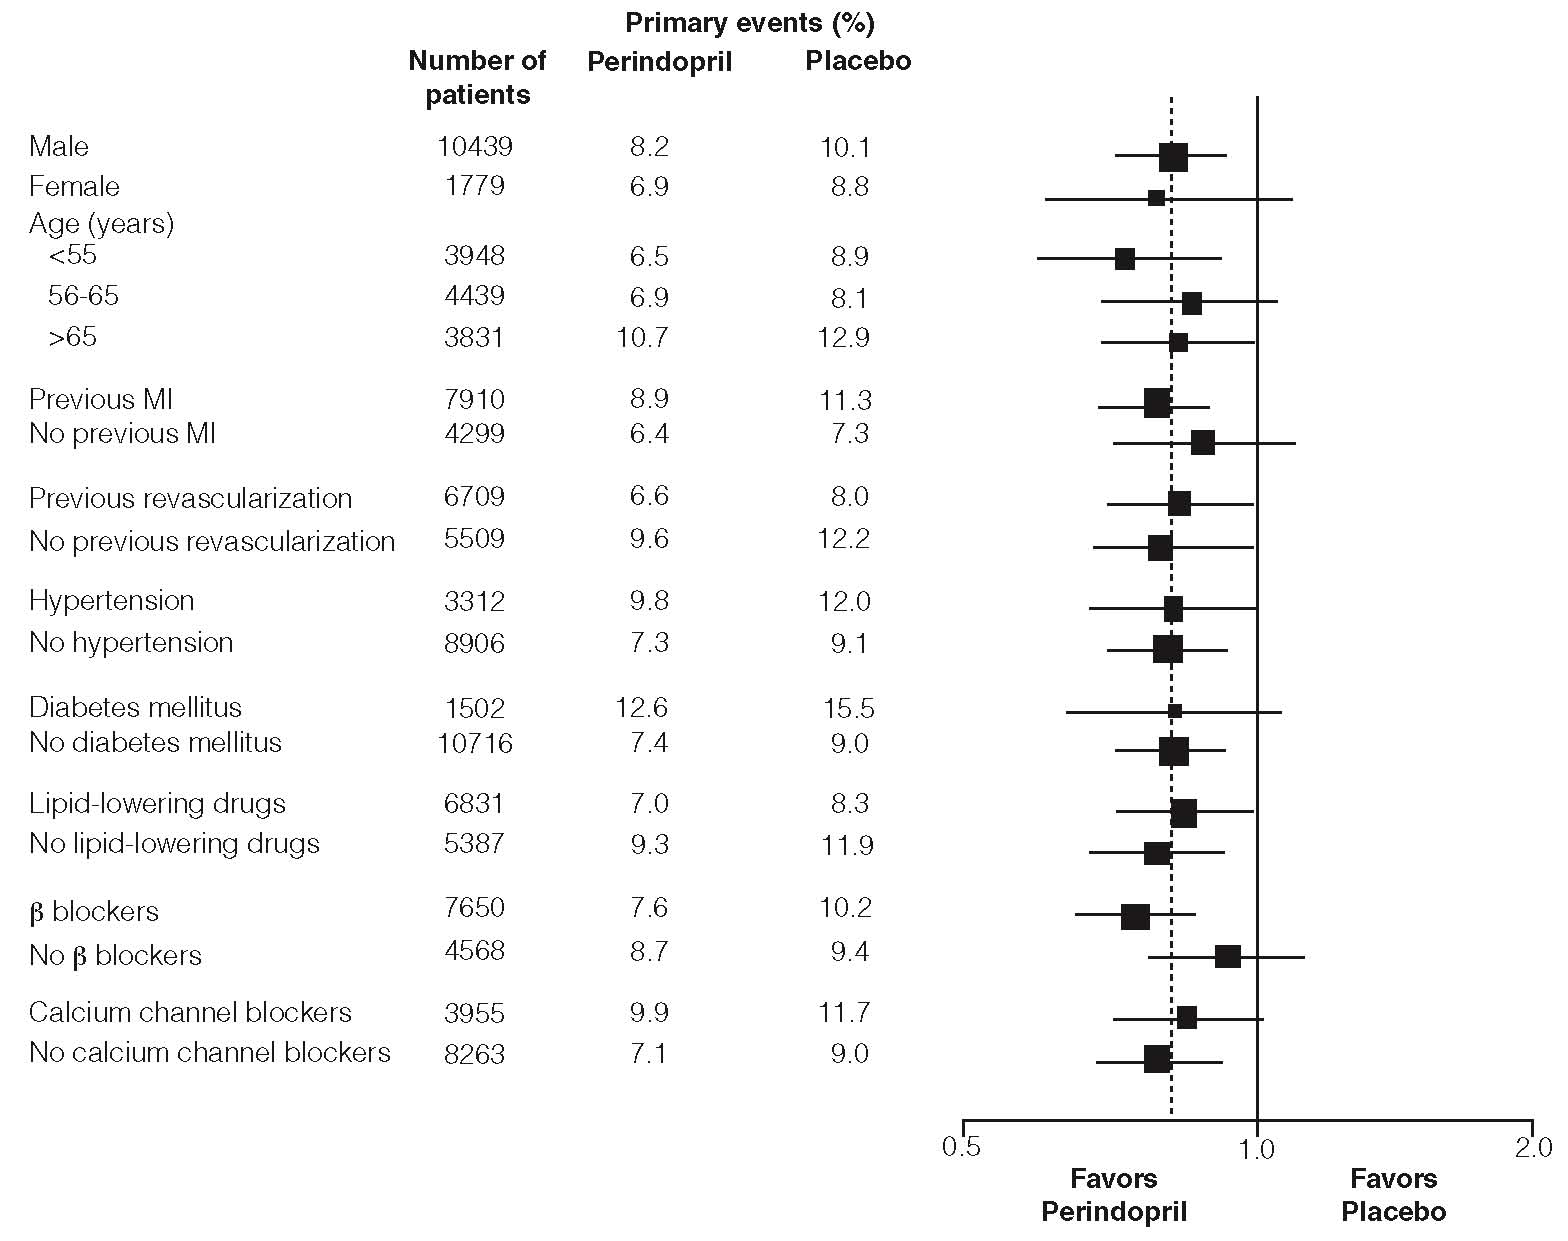 Figure 2: Beneficial Effect of Perindopril Treatment of Primary Endpoint in Predefined Subgroups